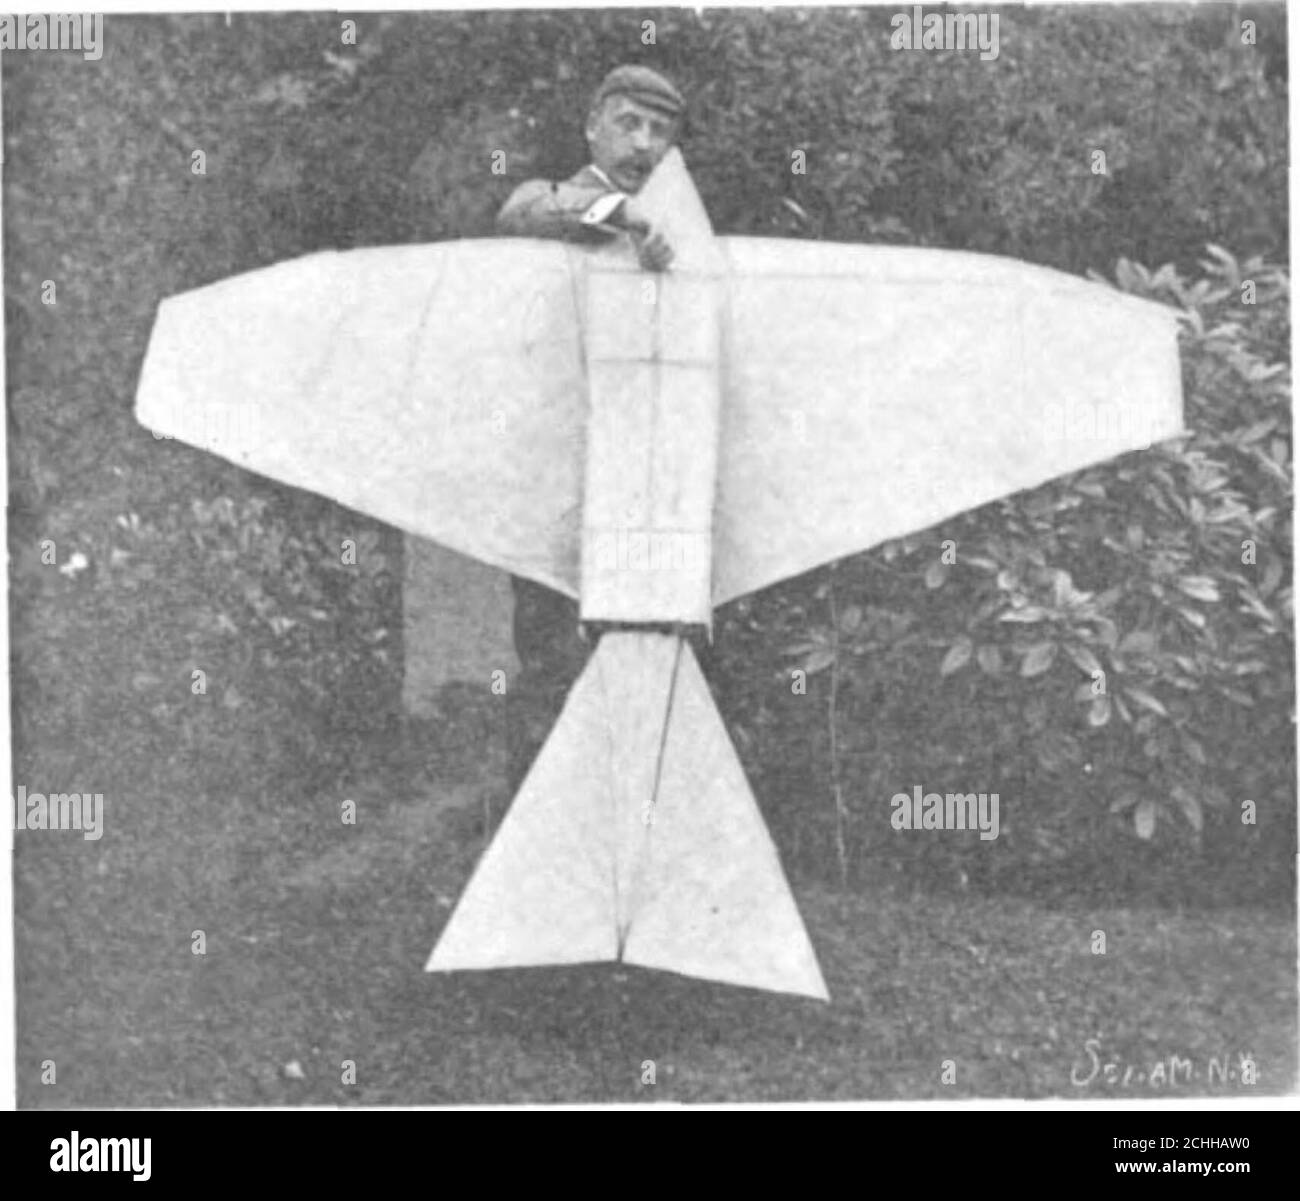 . Scientific American Volume 84 Number 05 (February 1901) . THE LATE PROF. ELISHA GRAY. up and down, which has the effect of raising it in avertical direction, and then between the beats it glidesforward, and the constant repetition of this actionproduces forward flight. In the smaller quick-flyingbirds these movements are scarcely discernible, ow.ngto the rapidity with which the wings are flapped, butwith the heavier and larger birds, such as the alba-tross and gull, the movements are perfectly distin-guishable.The result of these investigations convinced Mr. Dav-. FLAN VIEW OF FLYING MACHINE Stock Photo